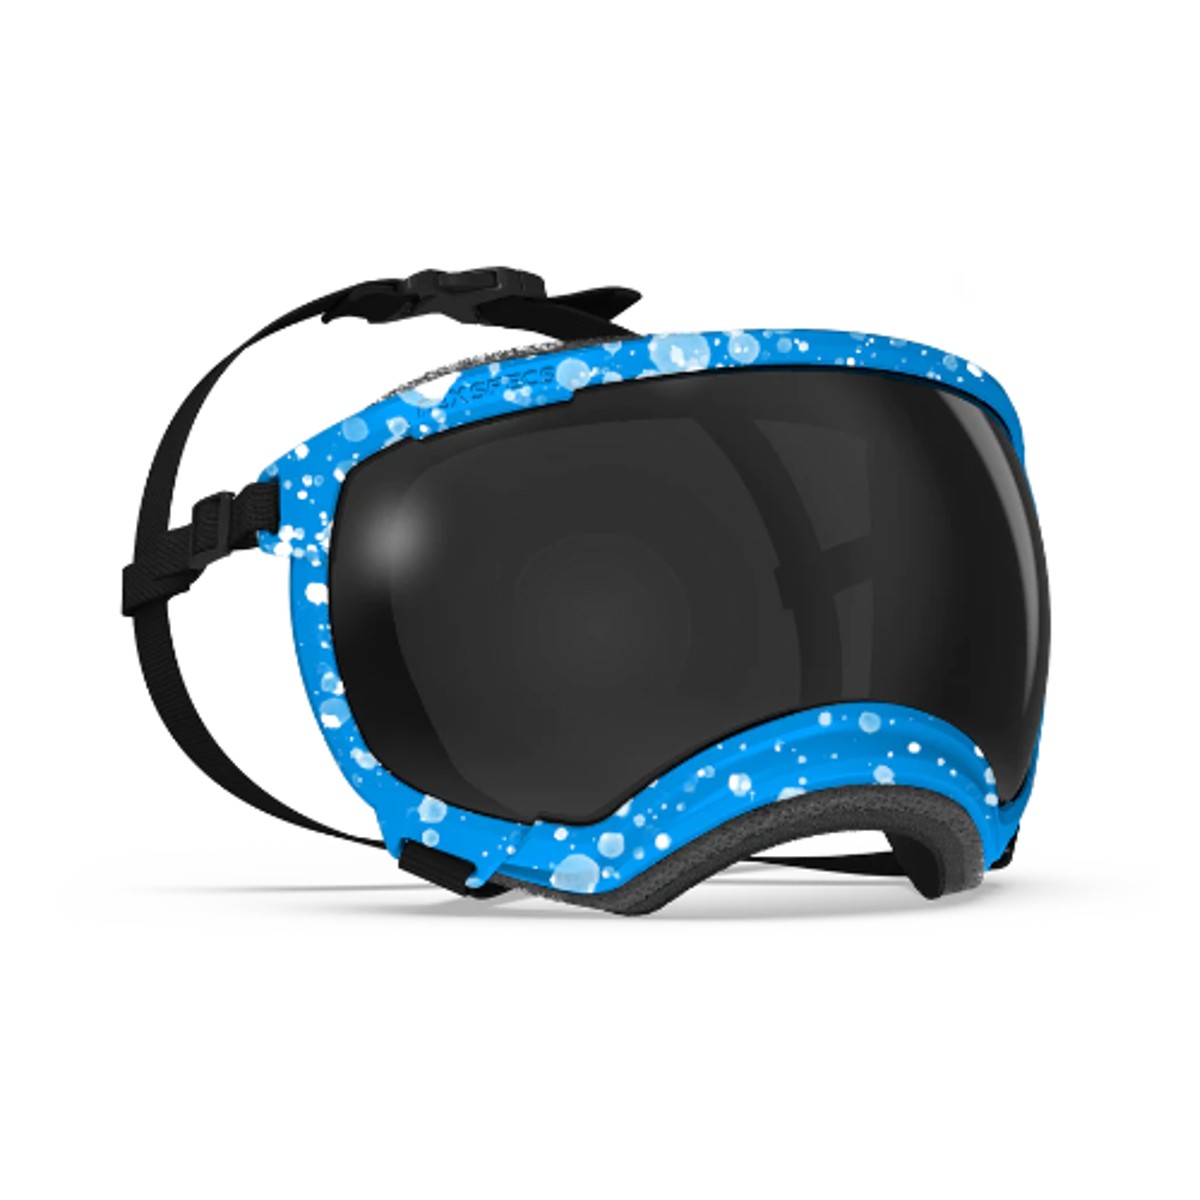 Rex Specs V2 Dog Goggles - Limited Edition Partly Cloudy